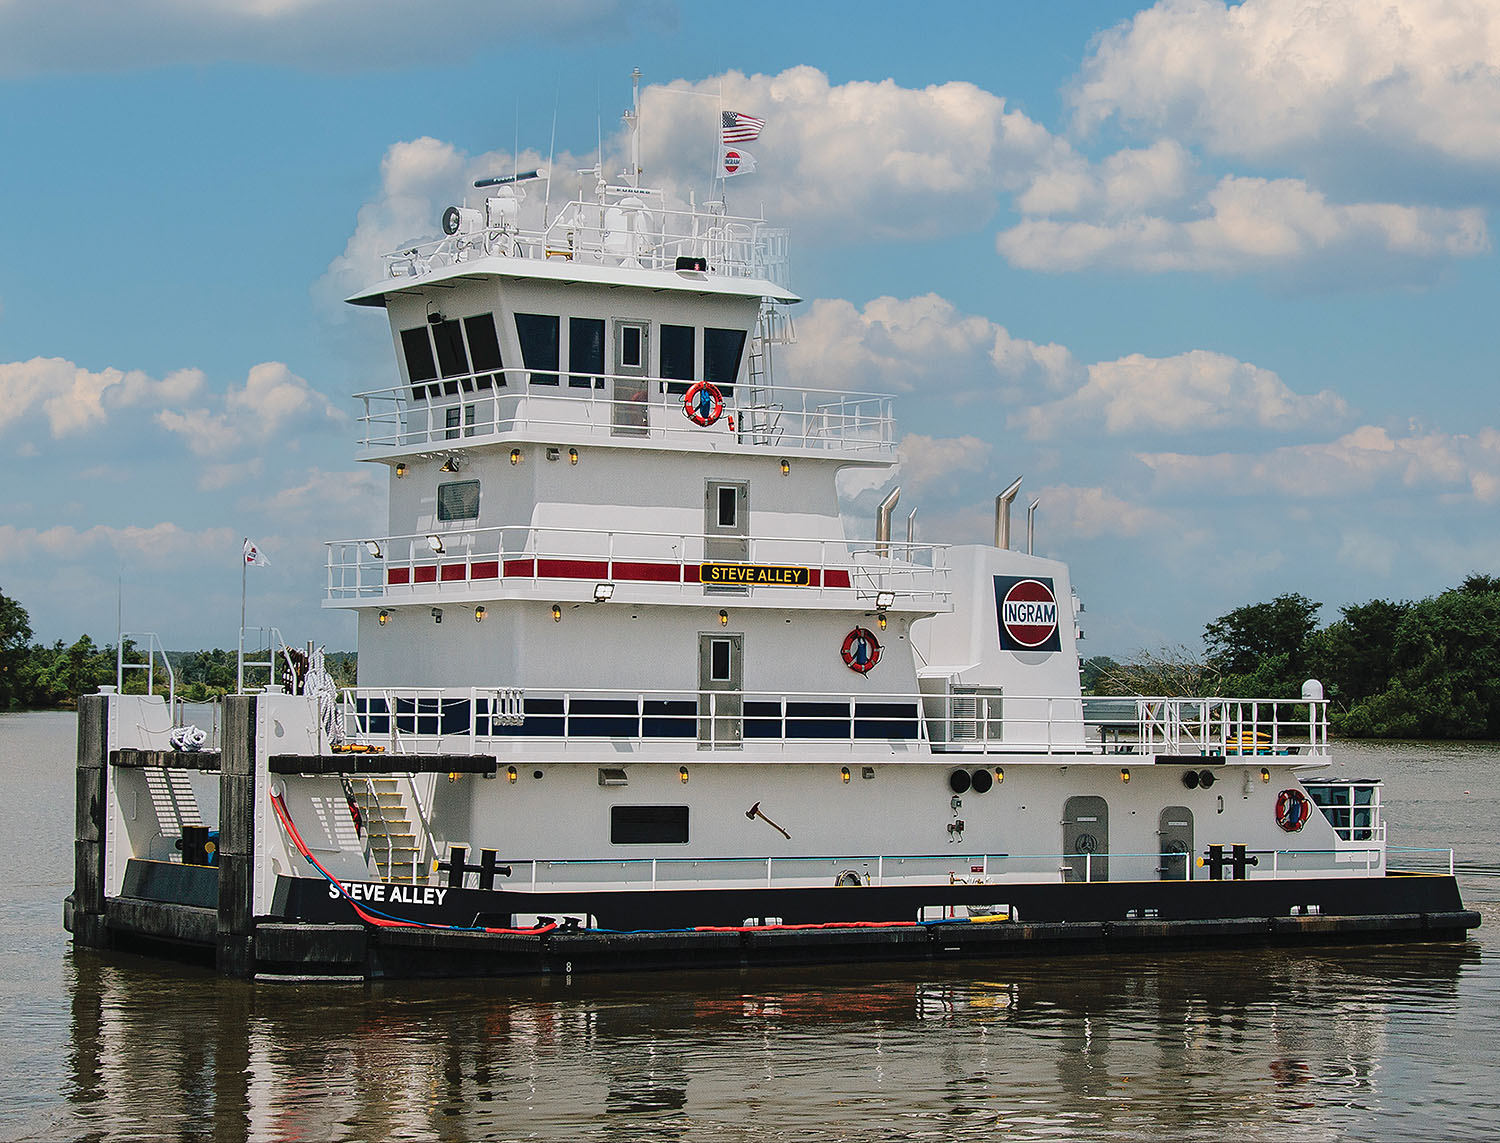 The mv. Steve Alley is the fifth of 10 new towboats Main Iron Works is building for Ingram Barge Company. (Photo illustration courtesy of Ingram Barge Company)